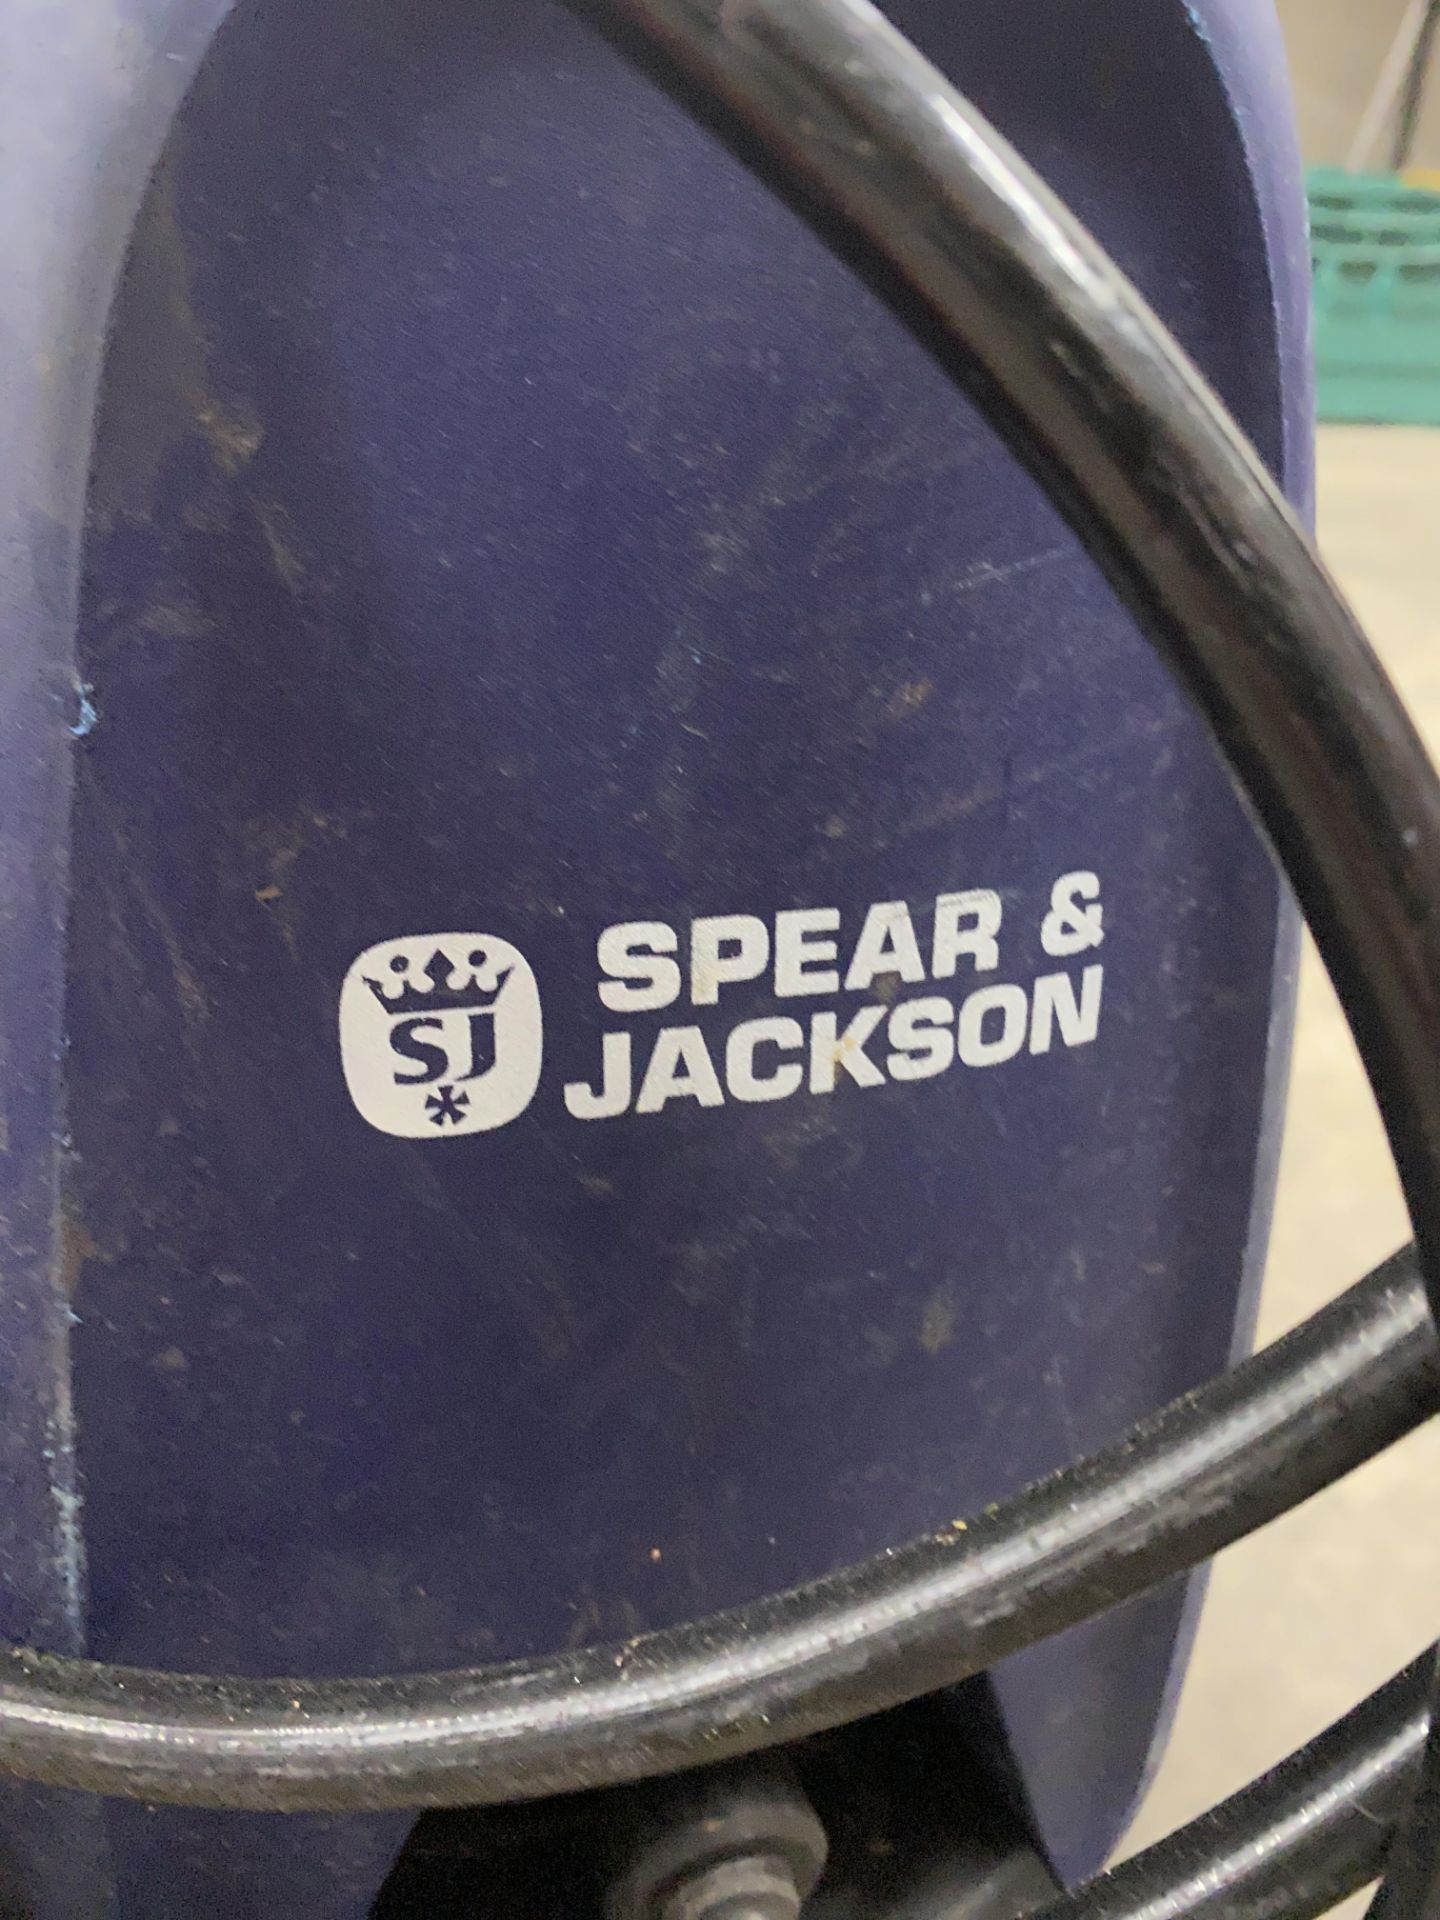 Spear & Jackson pressure washer and one extension reel (working condition unknown) - Image 2 of 3